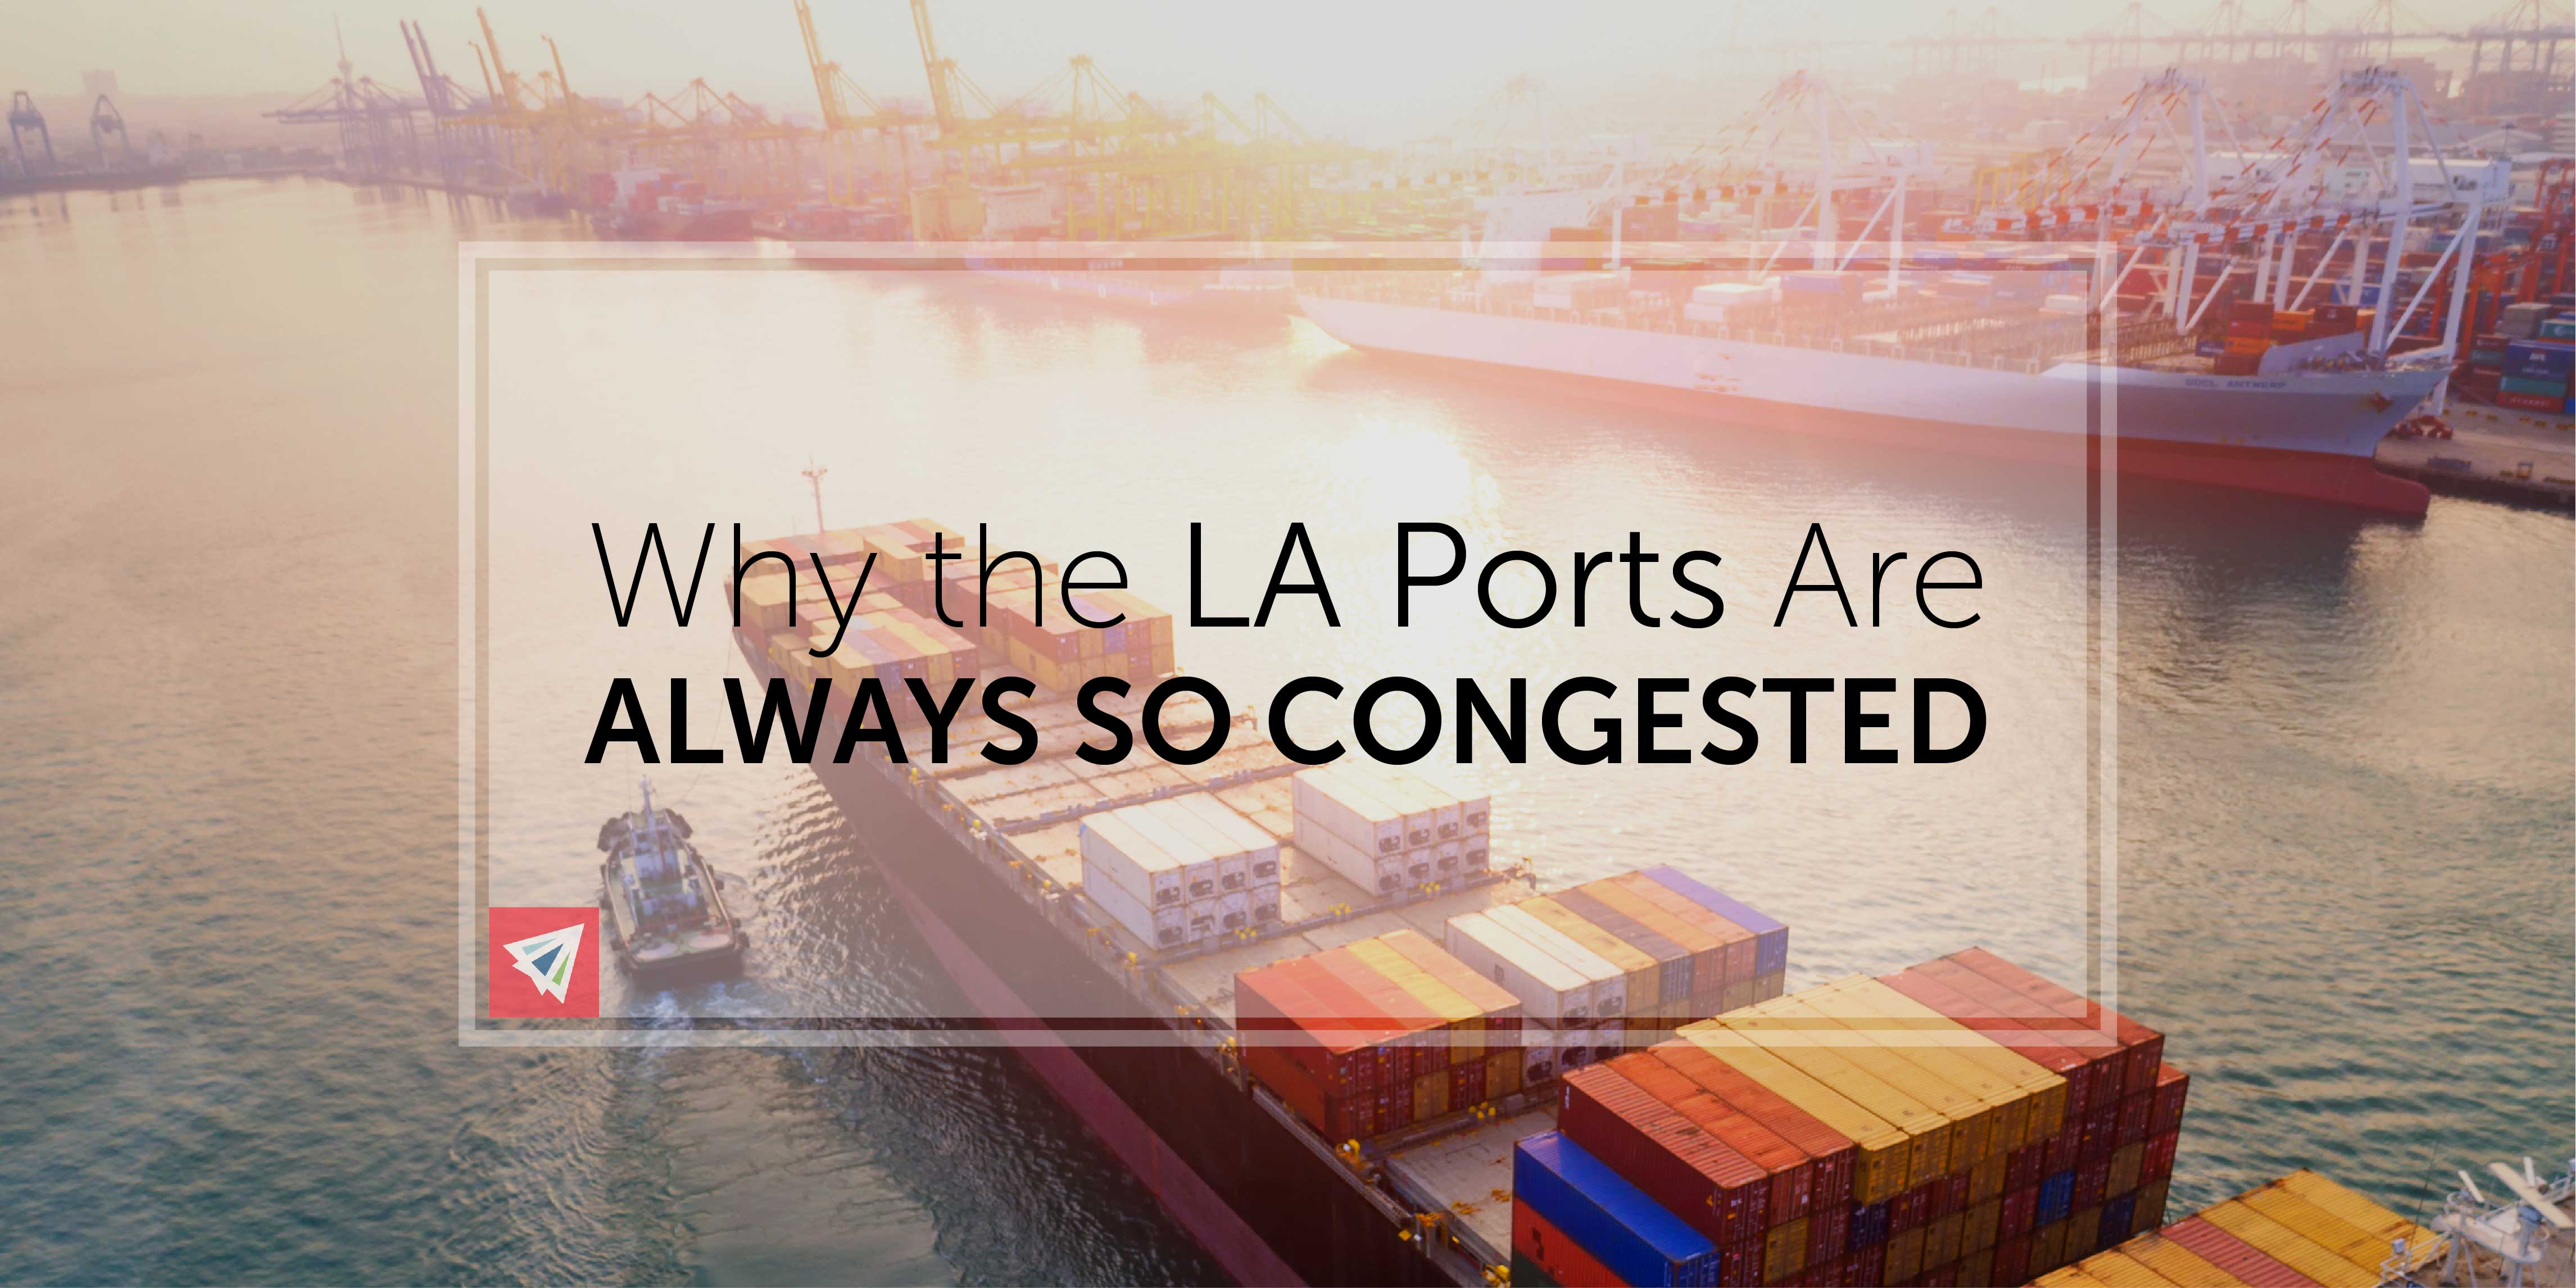 Why the LA Ports are Always so Congested